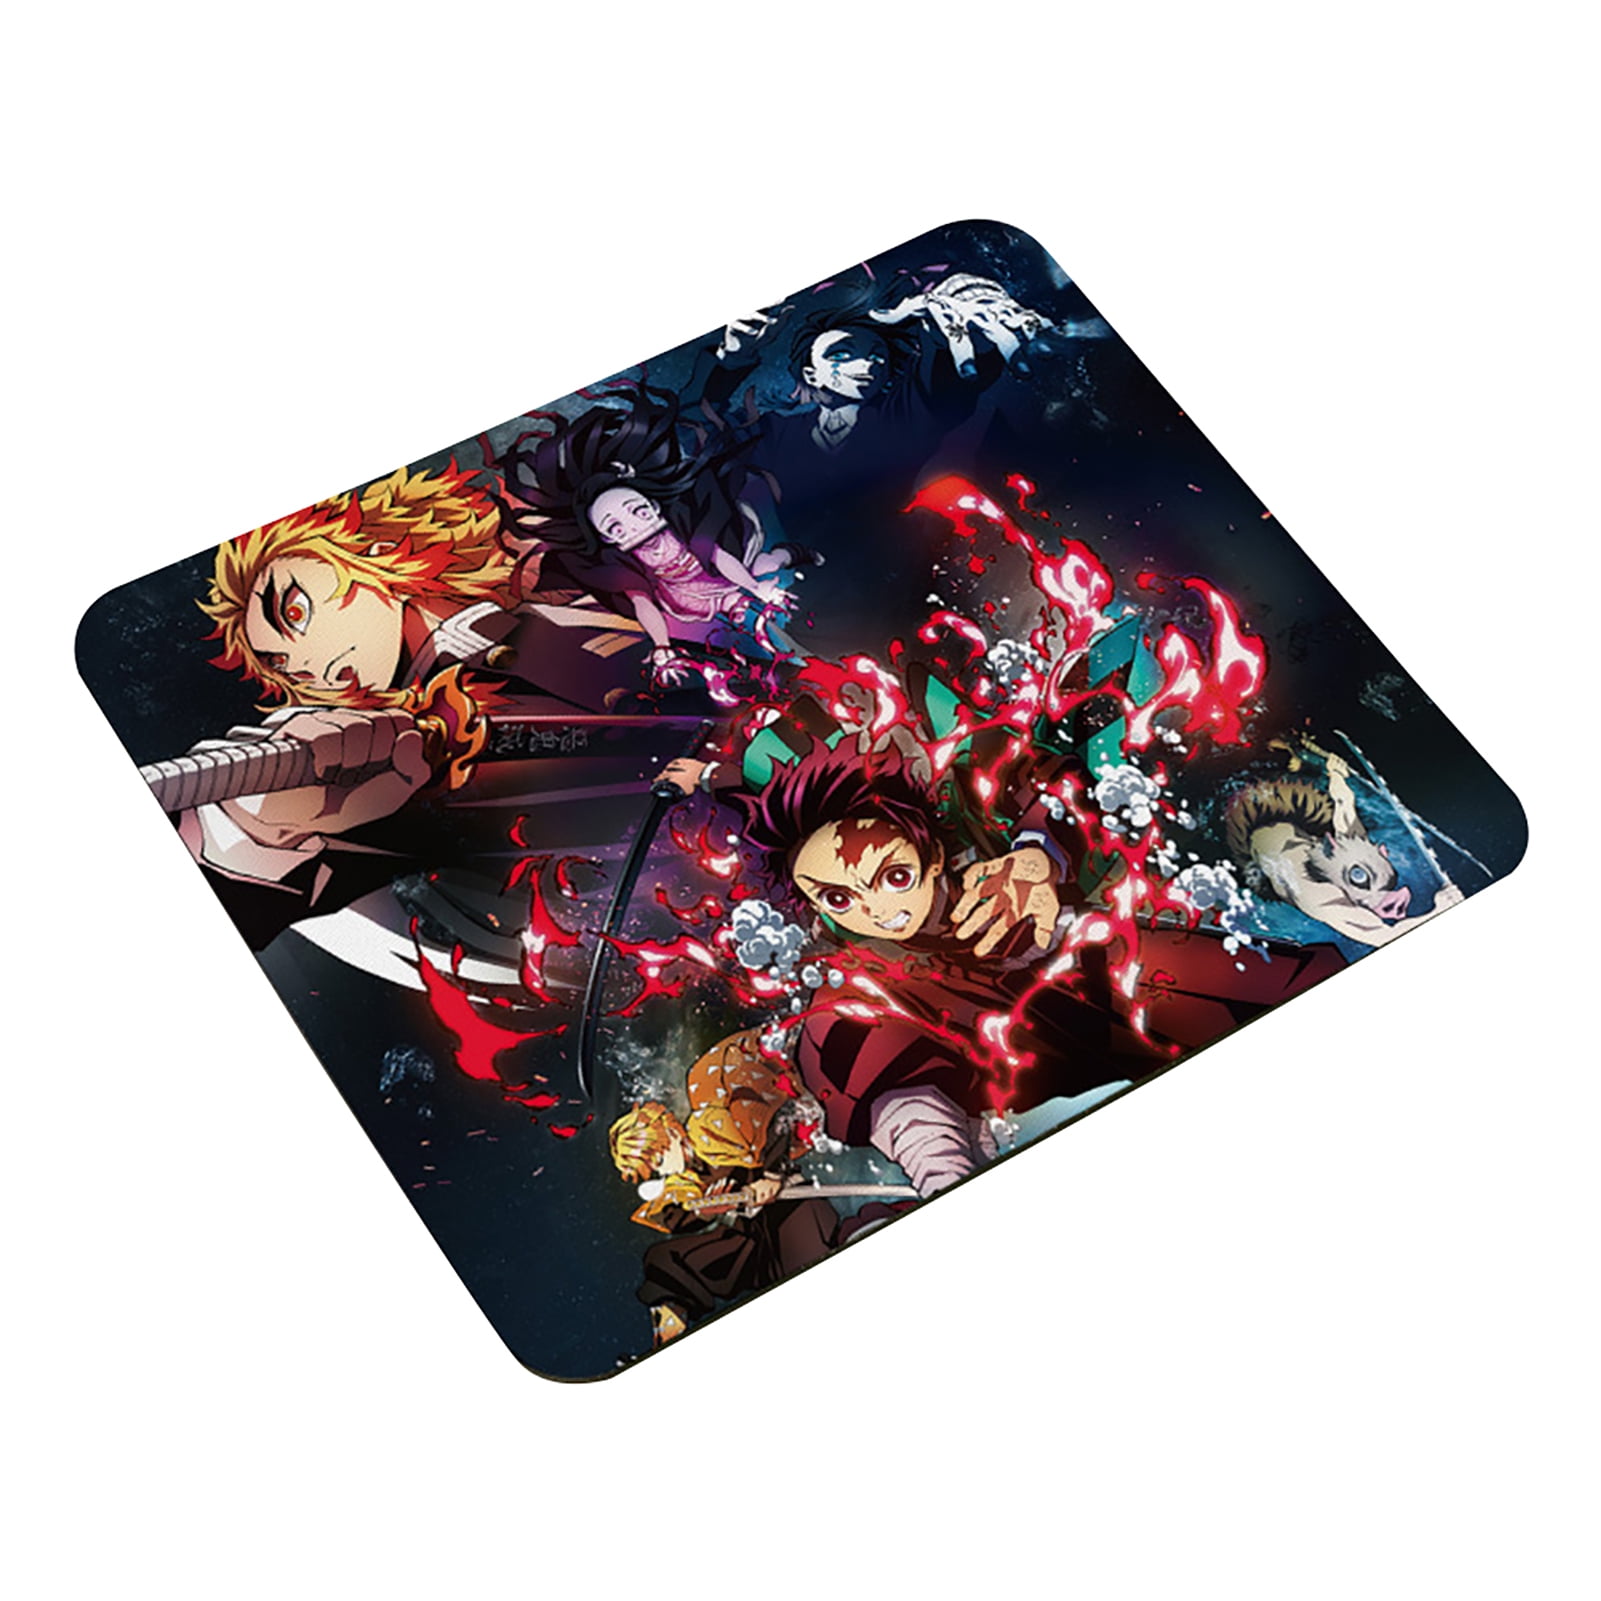 Hot Anime My Hero Academia Large Mouse Pad Desk table Play Mat Mice Xmas Gift